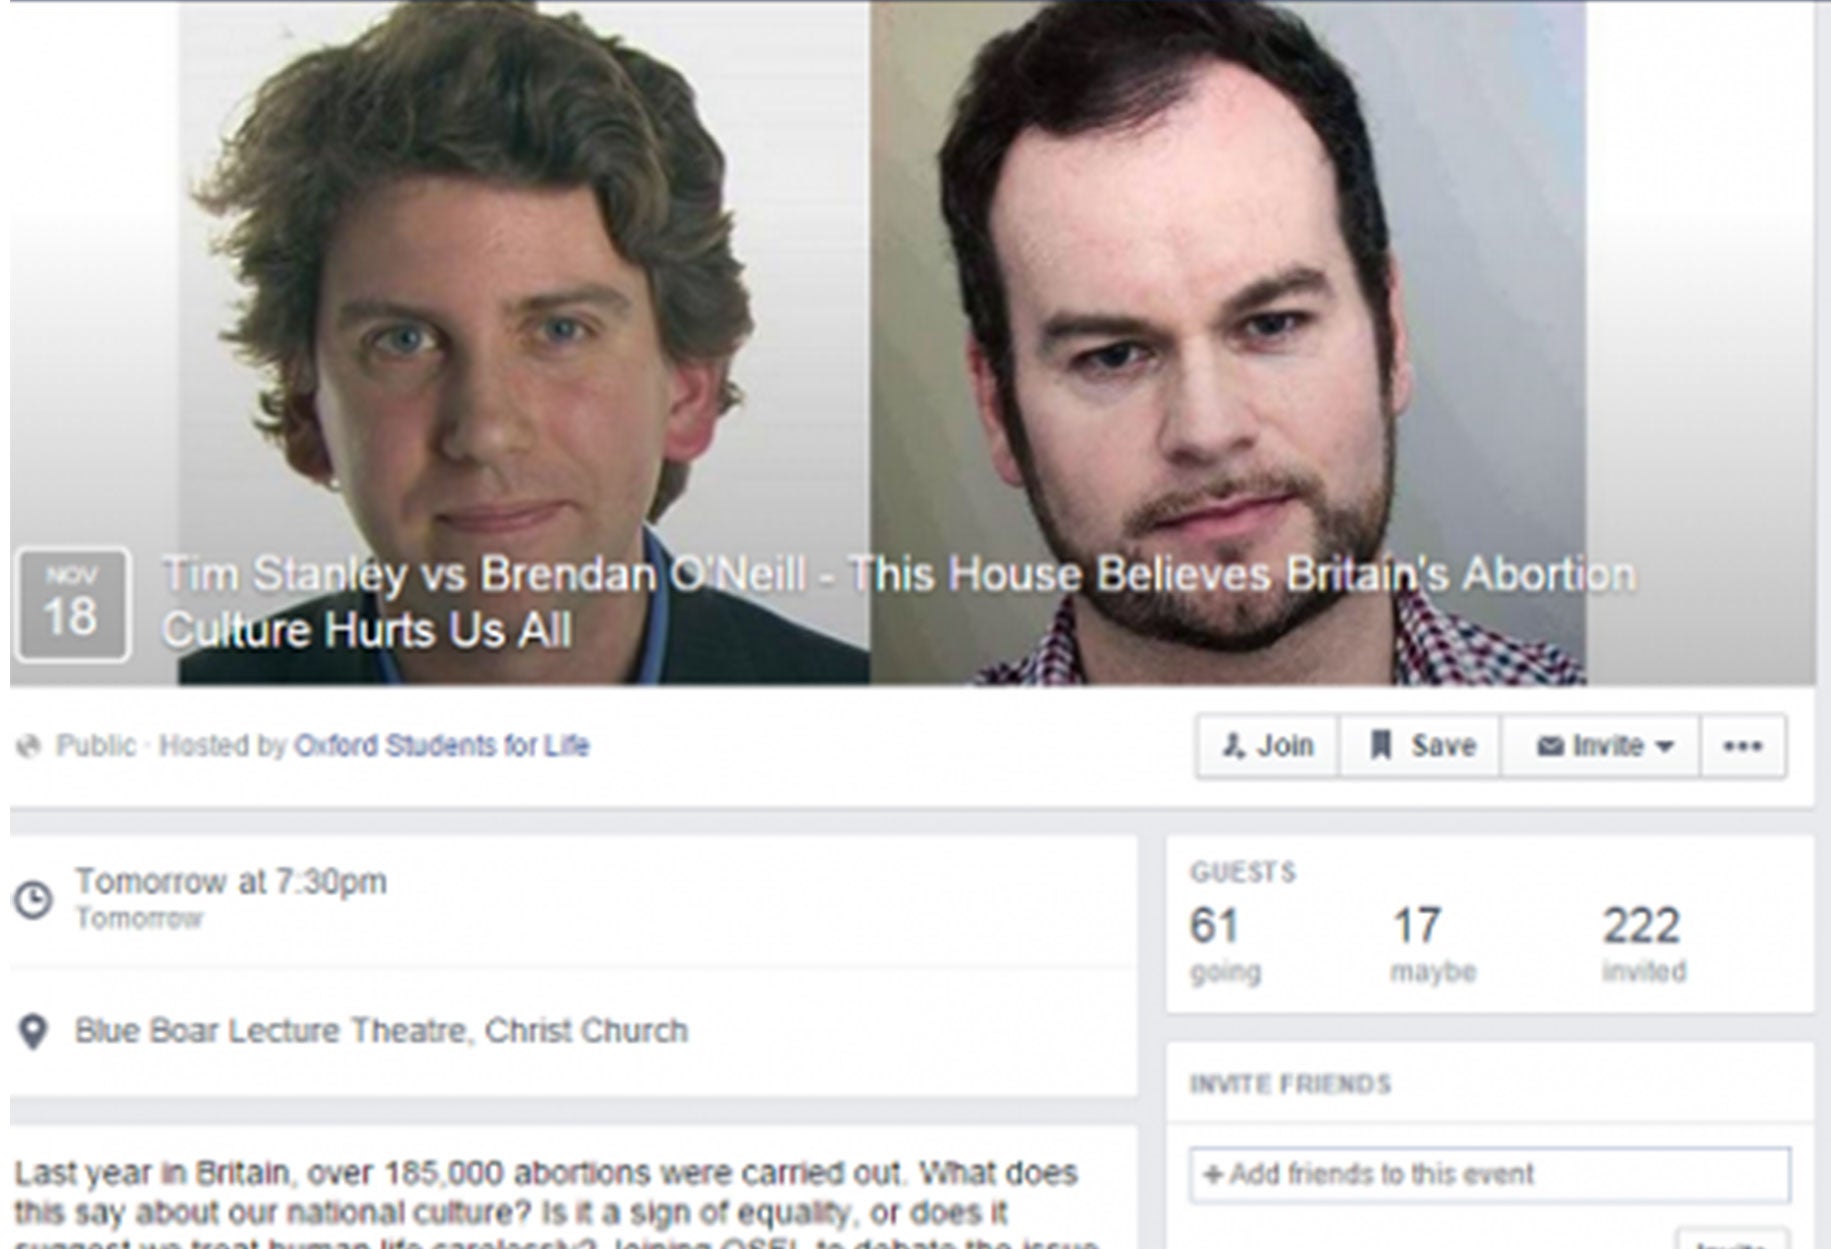 A screenshot of the debate's event page on Facebook